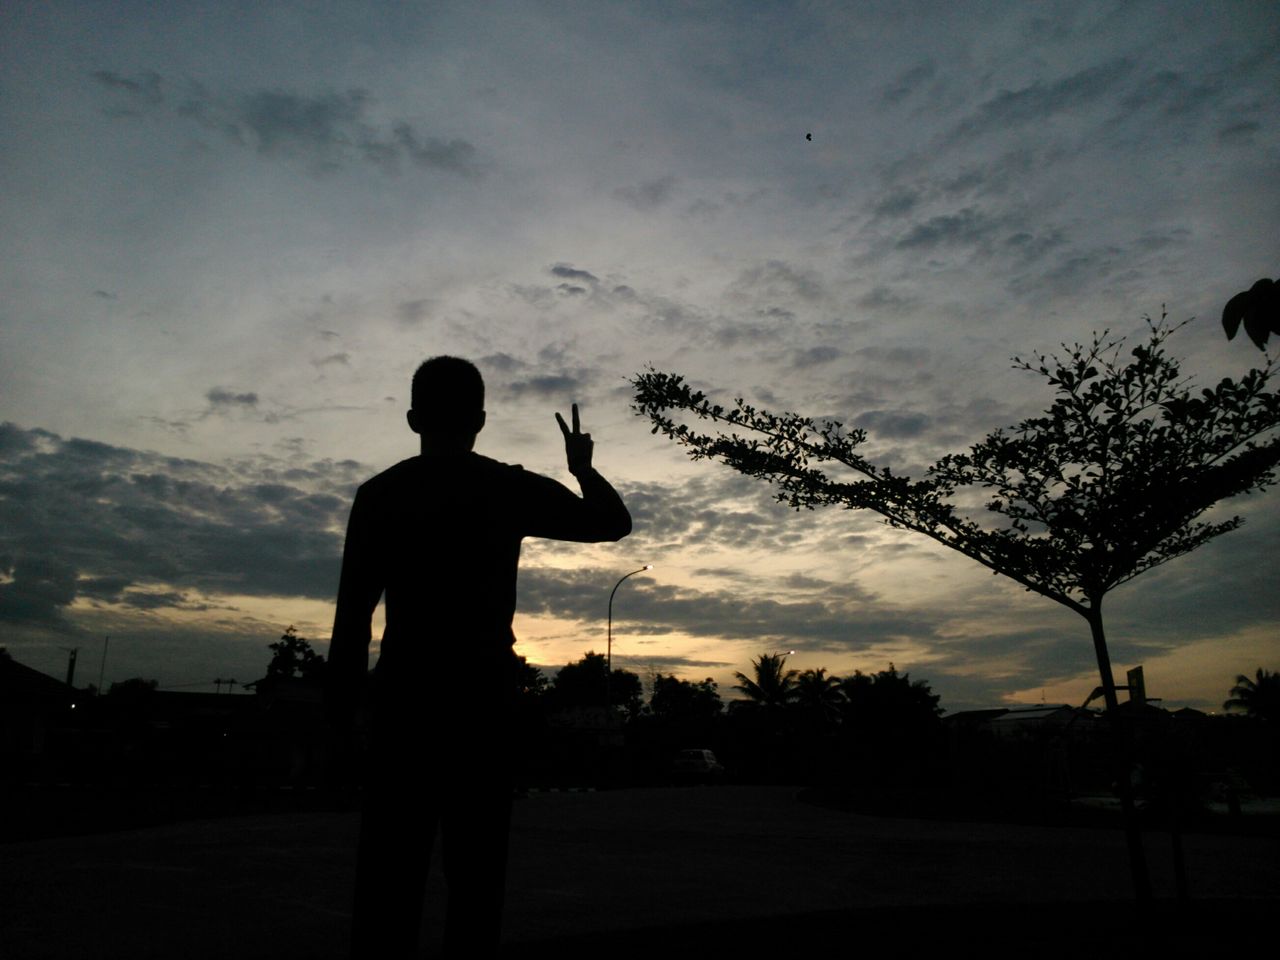 REAR VIEW OF SILHOUETTE MAN STANDING BY TREE AGAINST SKY